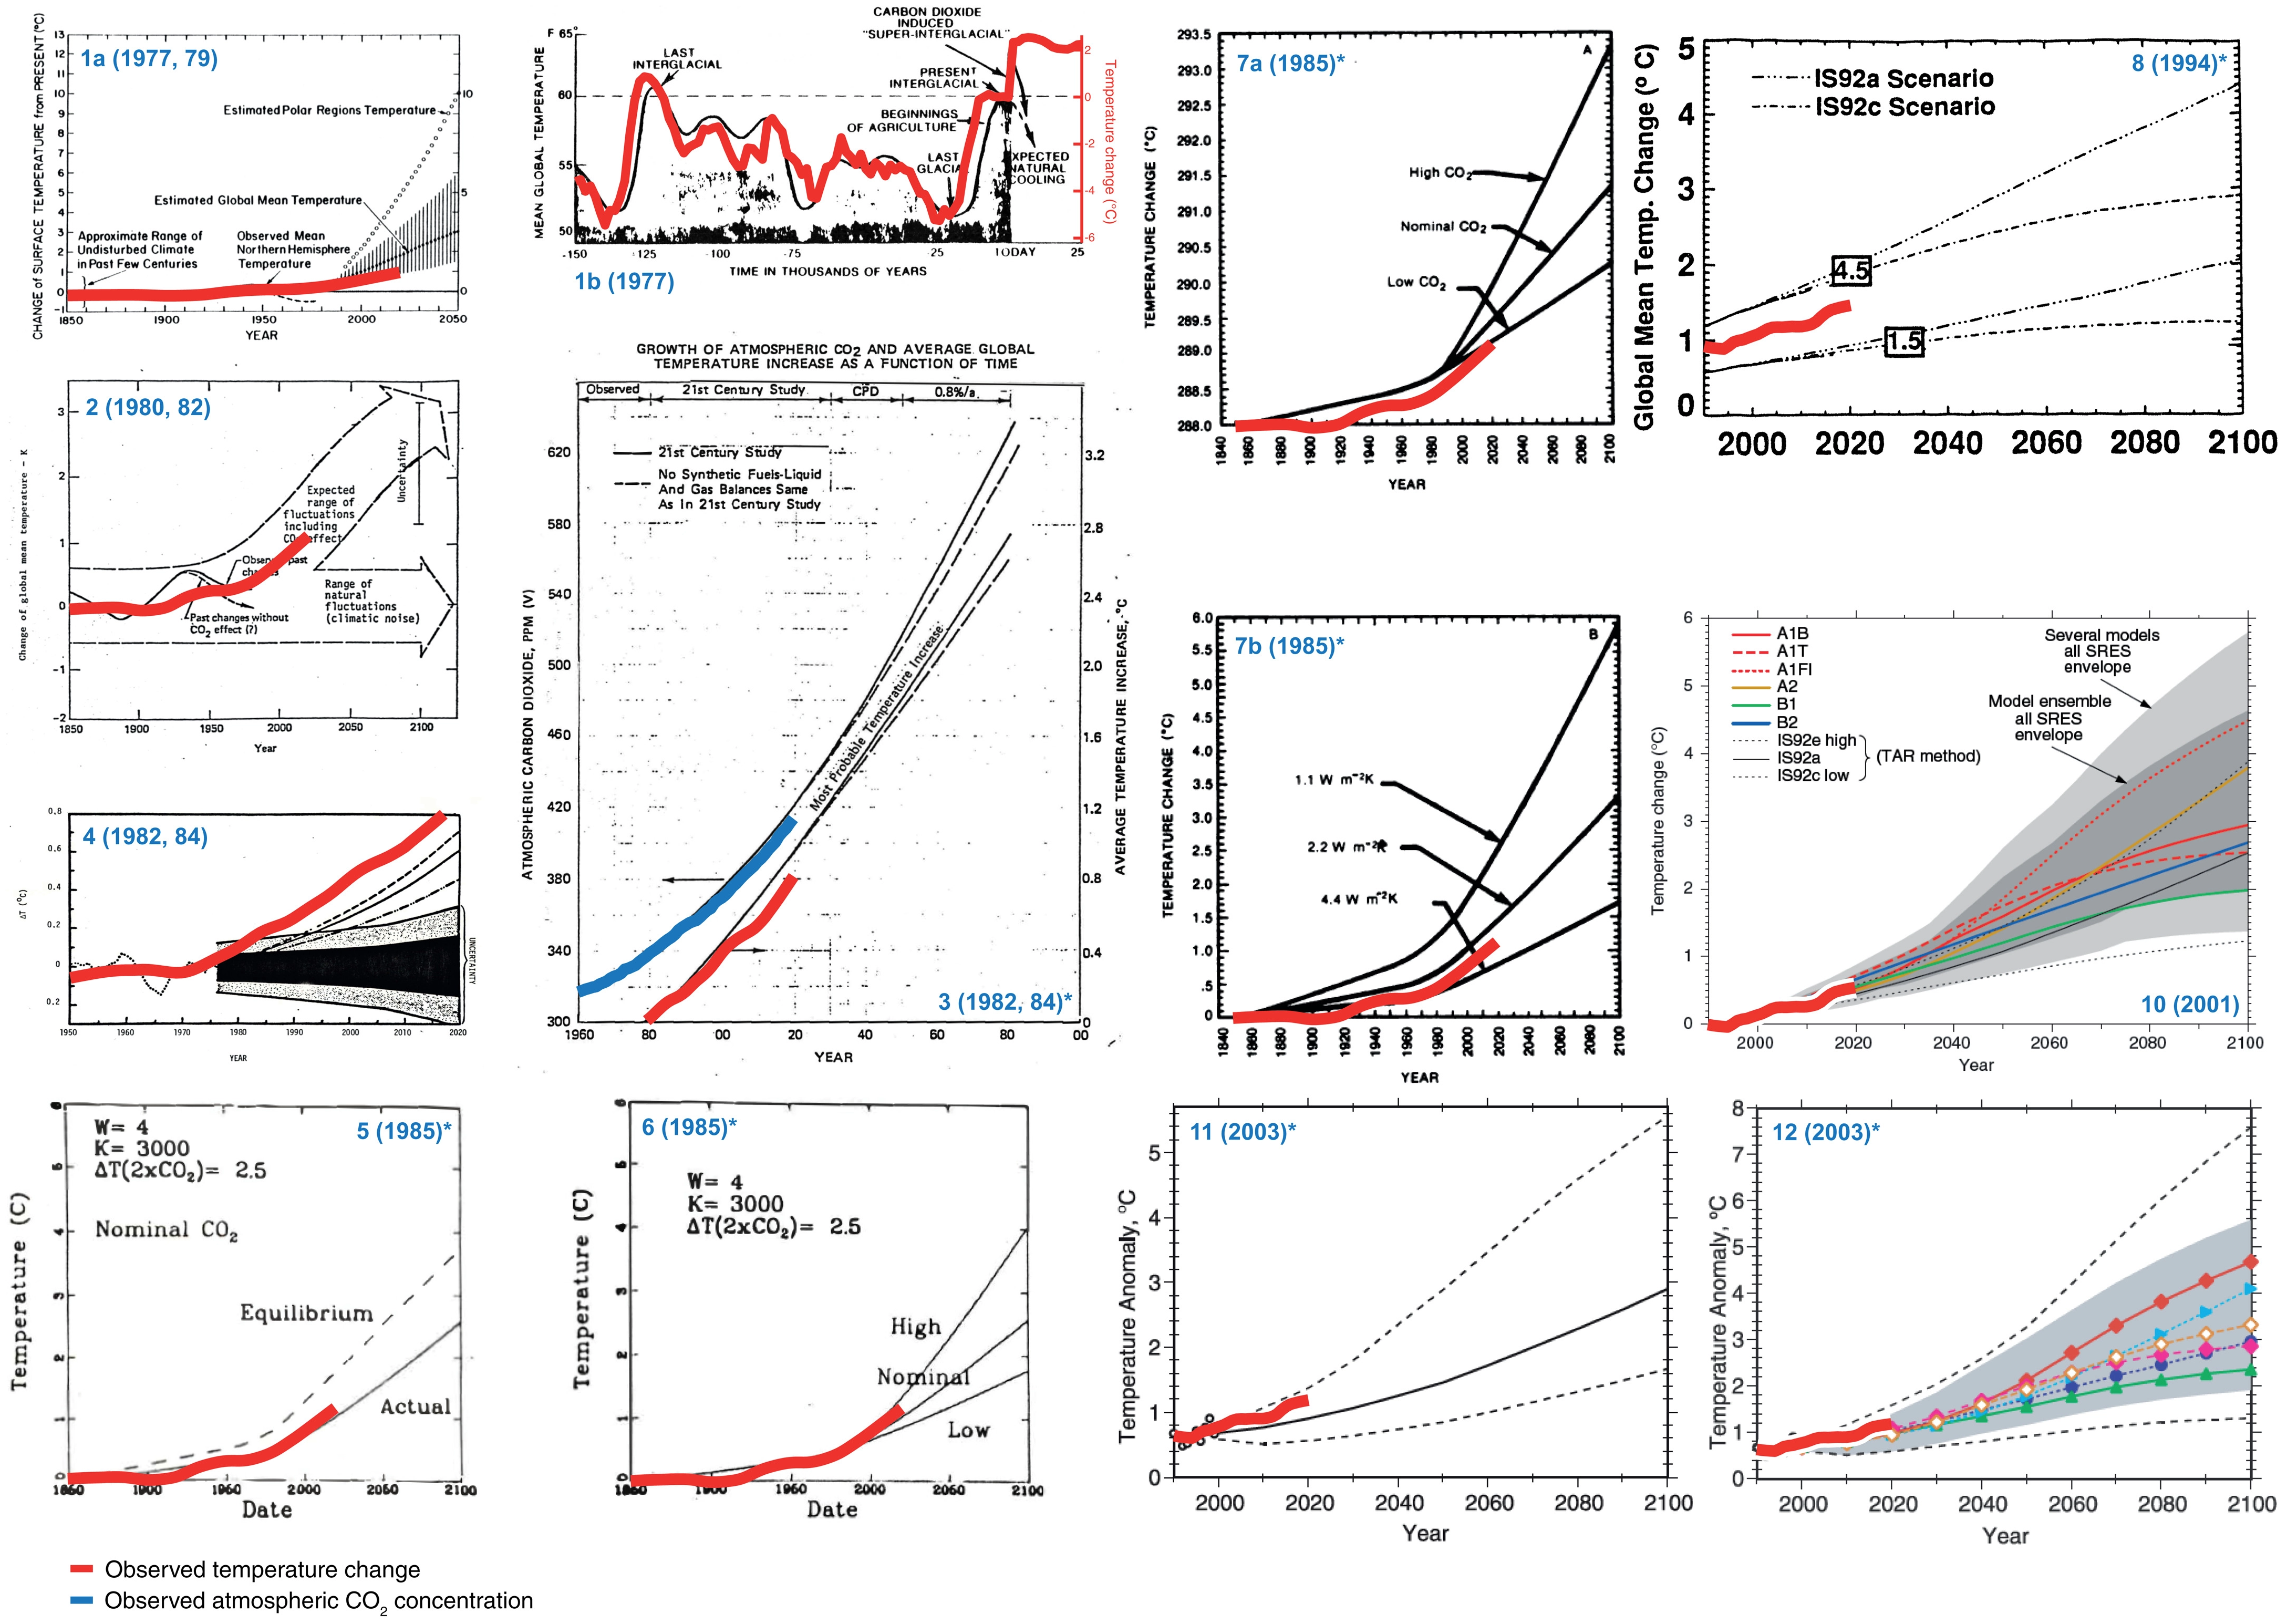 Historically observed temperature change versus time (red) compared against global warming projections reported by ExxonMobil scientists in internal documents and peer-reviewed publications. Panel numbers indicate projections reported in internal documents: (1a, b) Black (1977, vugraphs 10 and 11, respectively) (54) and Mastracchio (1979) (88), (2) Shaw (1980) (89) and Glaser (1982, fig. 9) (36), (3) Glaser (1982, fig. 3) (36) and Shaw (1984) (37), (4) Weinberg et al. (1982) (42) and Callegari (1984) (41), (5, 6) Flannery (1985, pages 23 and 24, respectively) (39); and in peer-reviewed publications: (7a, b) Hoffert and Flannery (1985, figs. 5.16A and B, respectively) (38), (8) Jain et al. (1994) (40), (10) Albritton et al. (2001) (90), (11, 12) Kheshgi and Jain (2003, figs. 7c and 8c, respectively) (91). Asterisks indicate global warming projections modeled by ExxonMobil scientists themselves. Panels have been numbered to match the labels in Fig. 2; this means that (9) Kheshgi et al. (1997) (92), which reports projections in tabulated rather than graphical form, is represented in Fig. 2 but is not included here. Temperature observations reflect the smoothed annual average of five historical time series. The only exception to this is the historical temperature record in (1b), which reflects a smoothed Earth system model simulation of the last 150,000 years driven by orbital forcing only, with an appended moderate anthropogenic emissions scenario. Panel 3 additionally compares projected atmospheric carbon dioxide concentrations against annual mean observations (blue). Graphic: Supran, et al., 2023 / Science